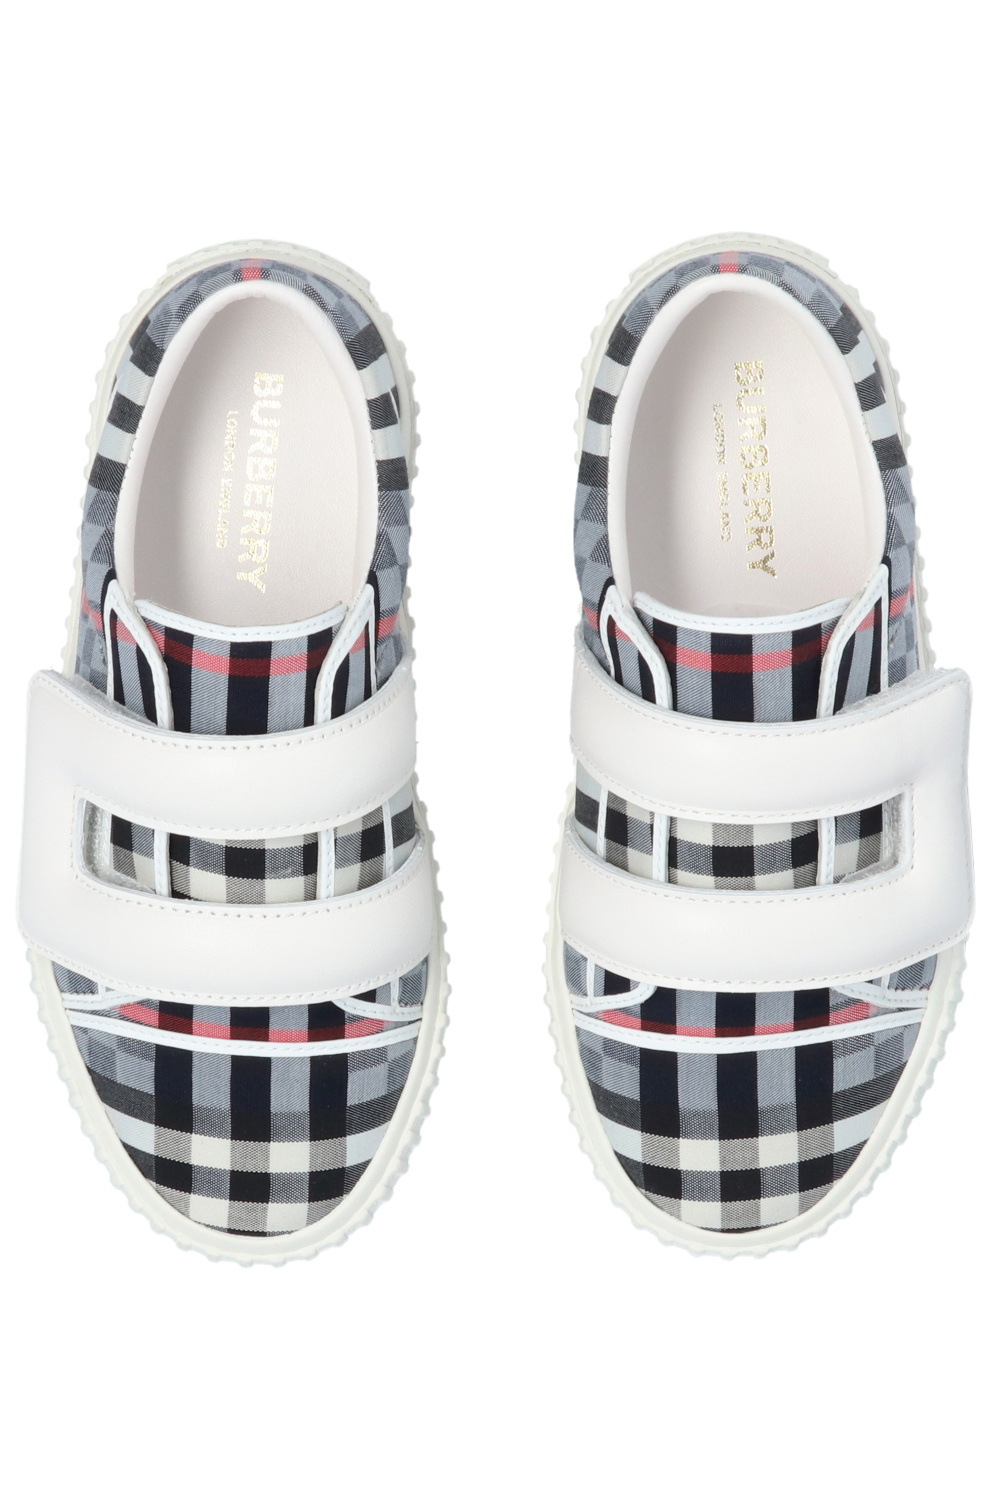 burberry 90s Kids Checked sneakers